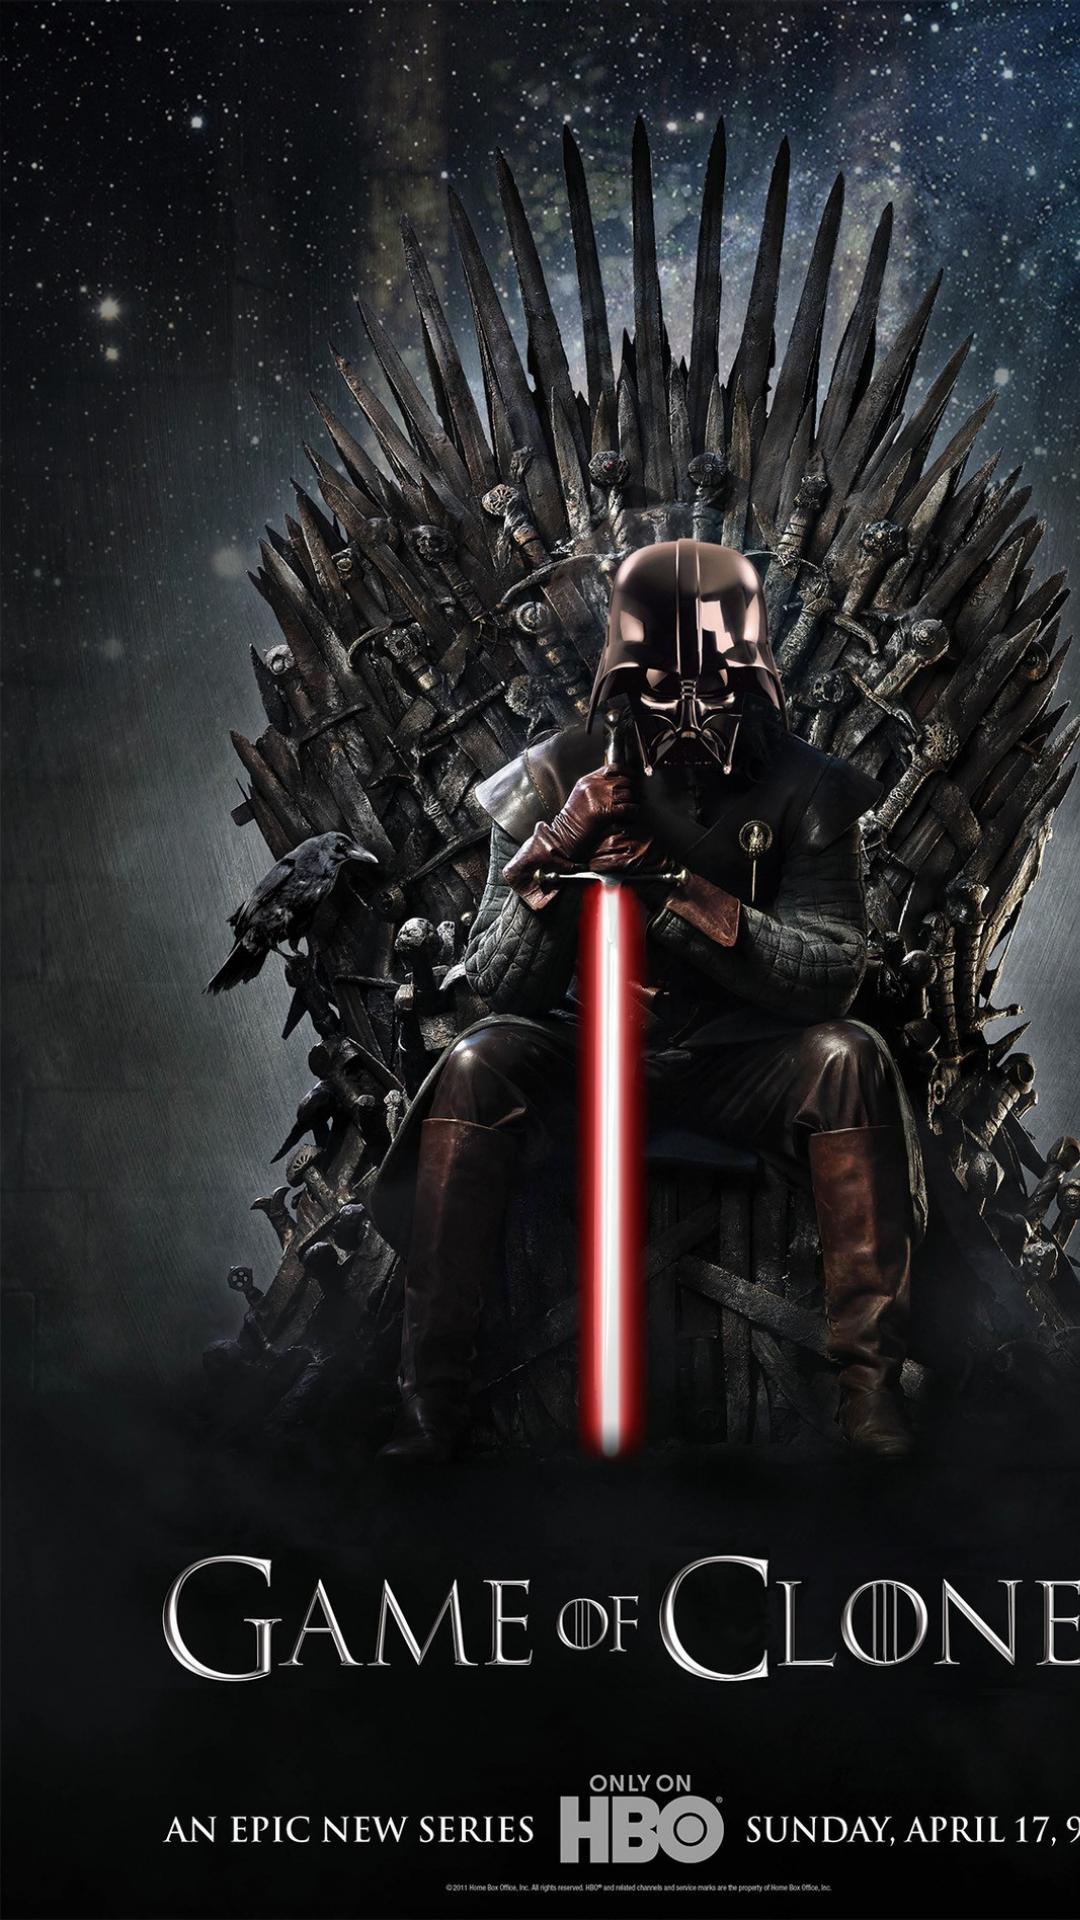 Lightsabers game of thrones iron throne clones wallpaper 69039